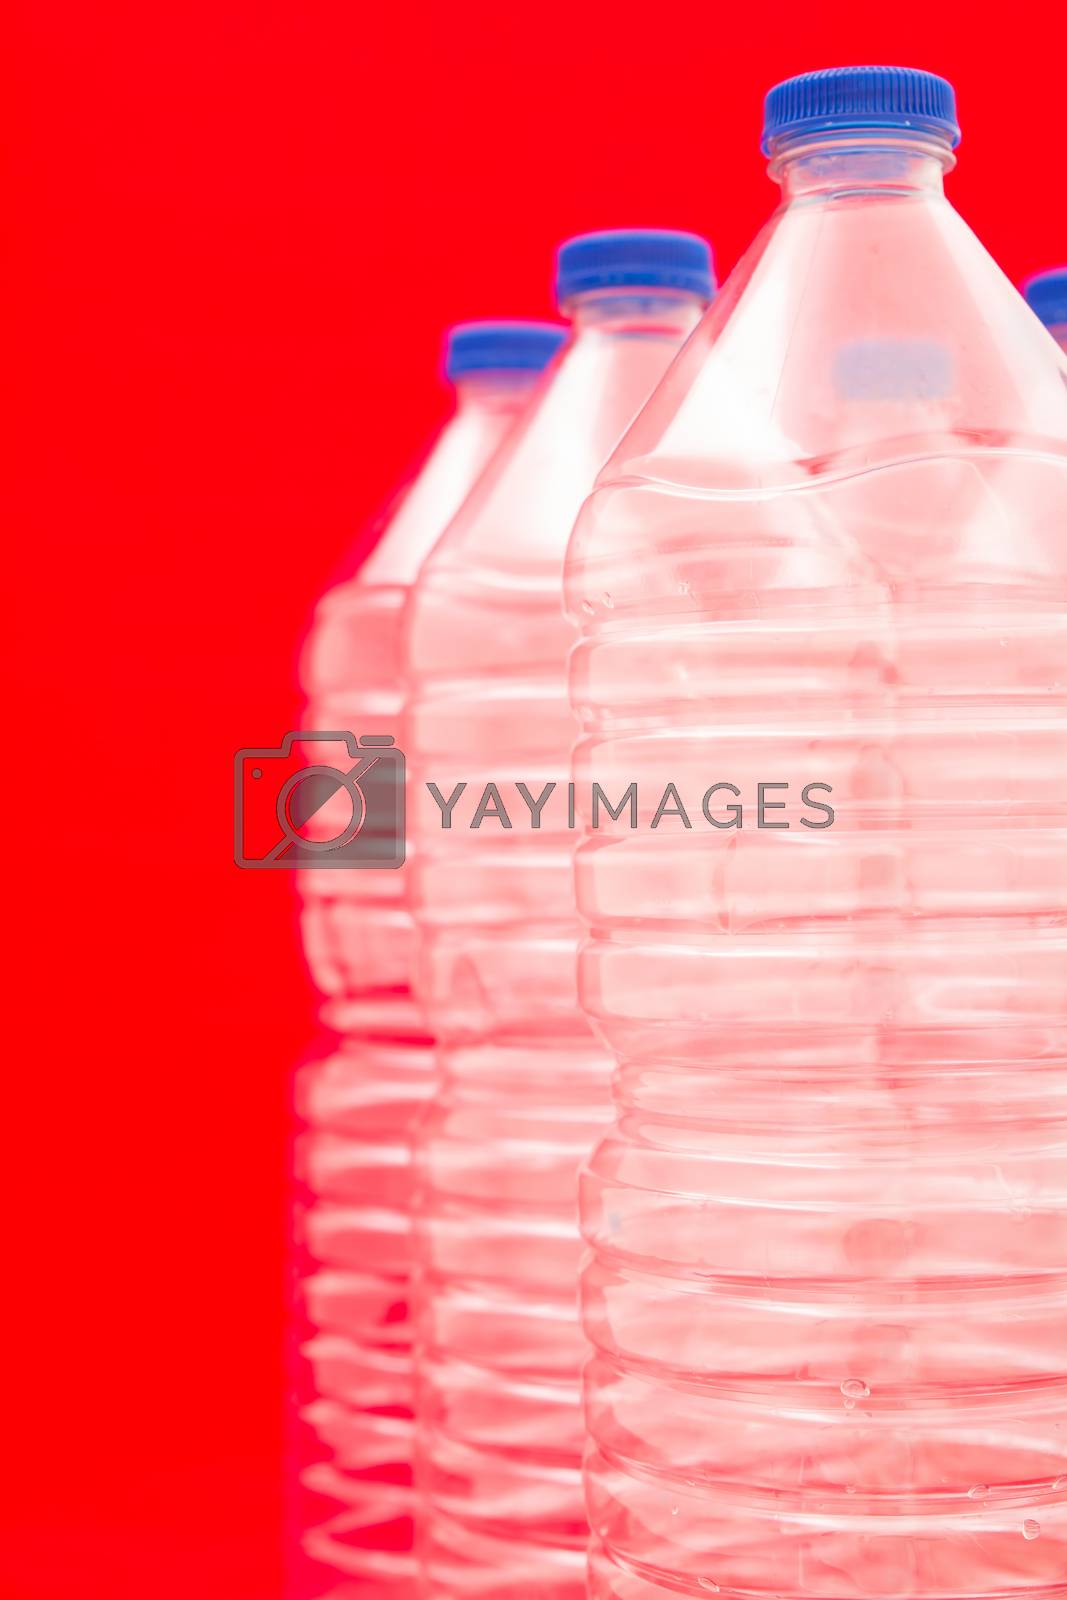 Royalty free image of Bottles of water	 by conejota